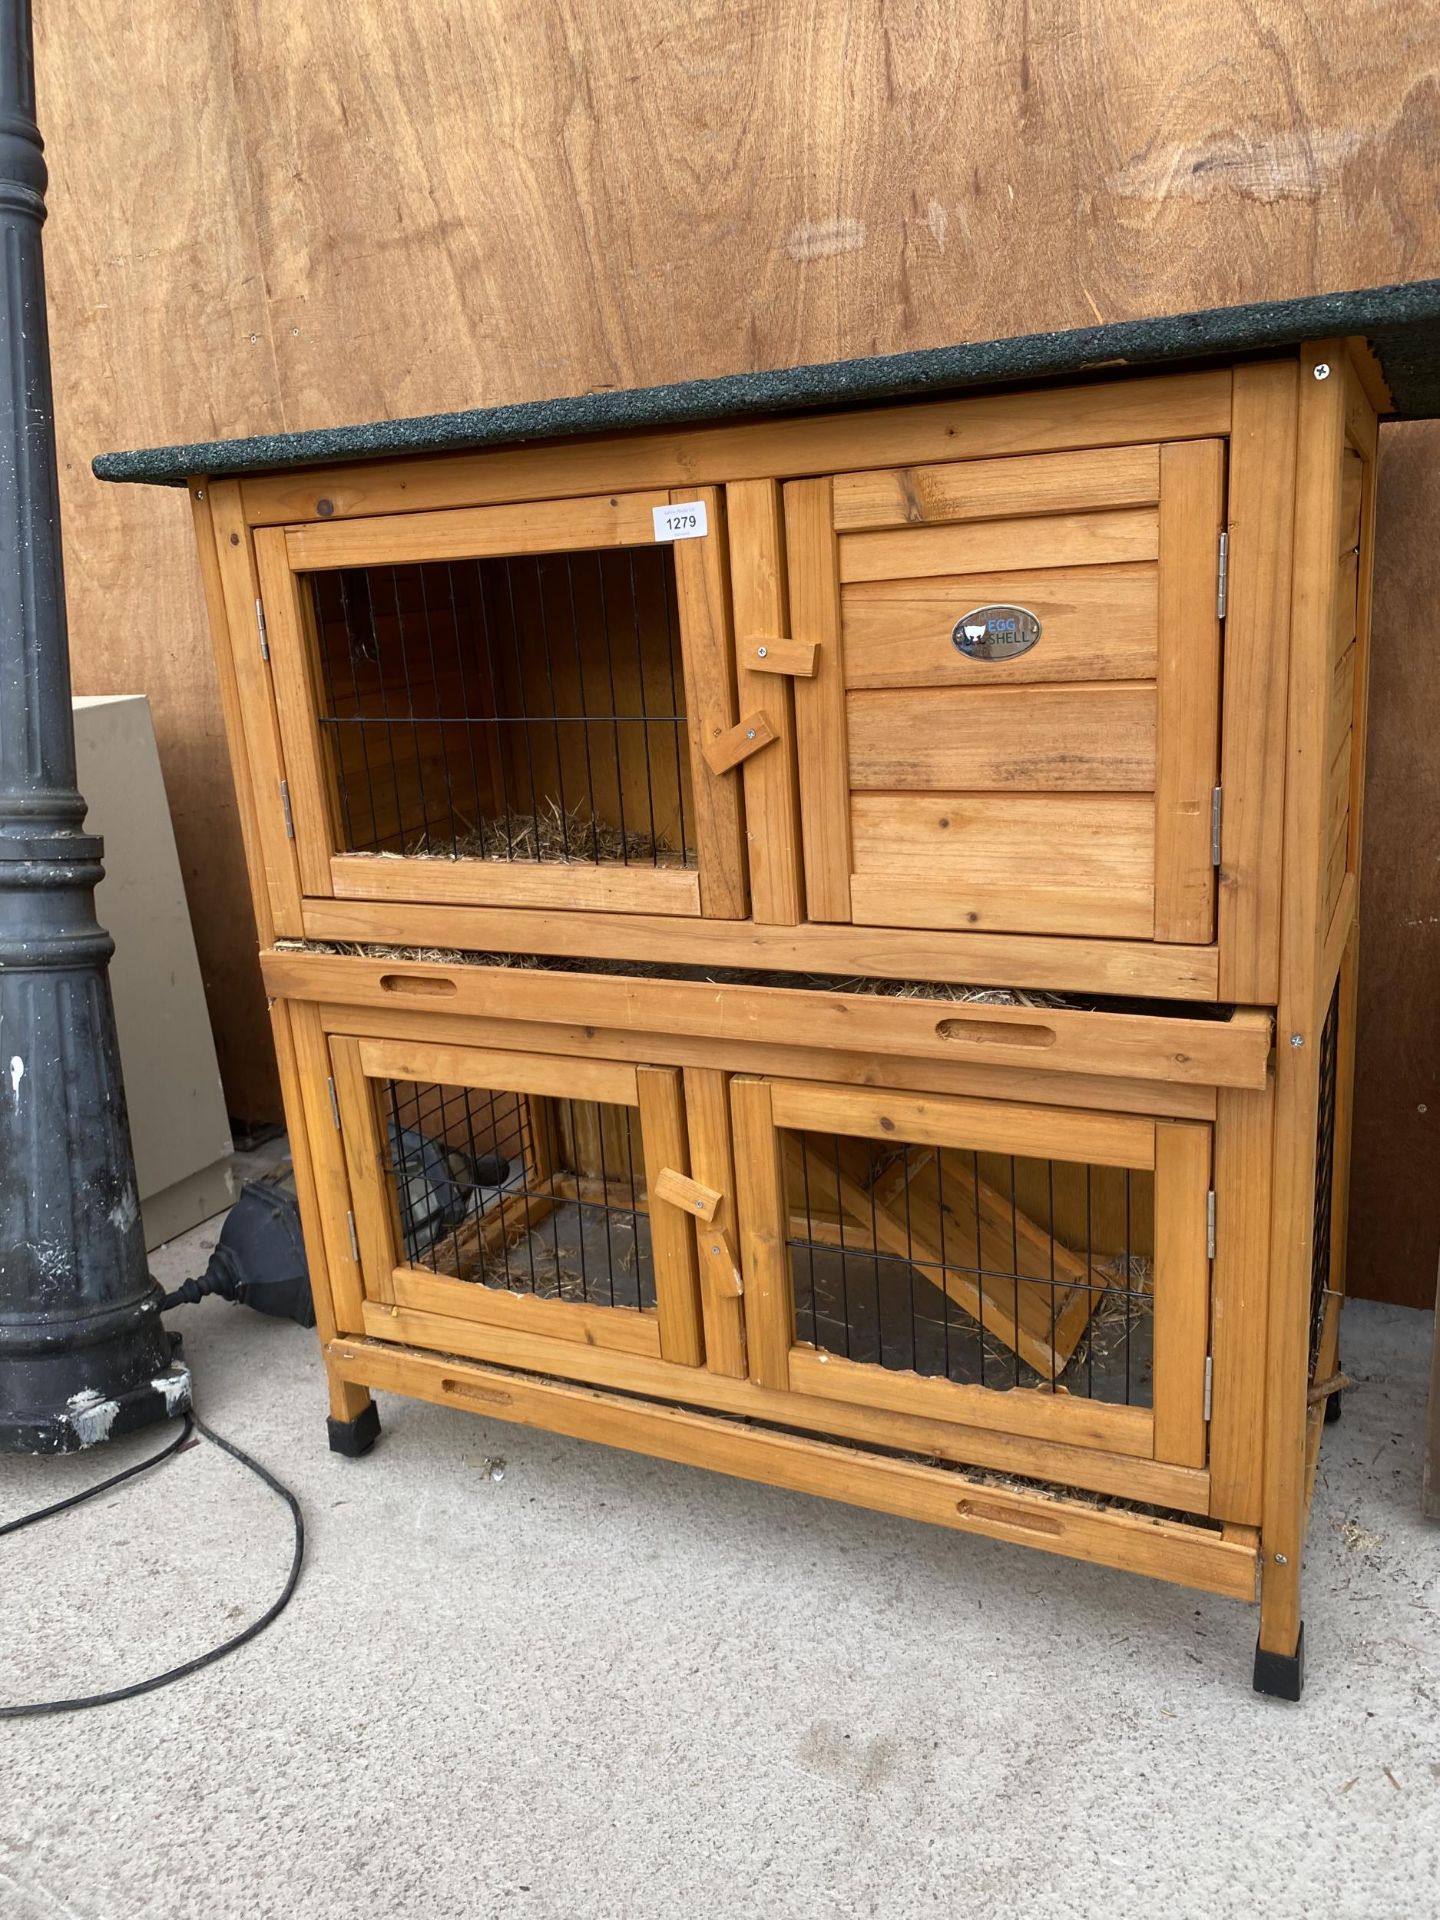 A WOODEN TWO TIER RABBIT HUTCH - Image 2 of 6